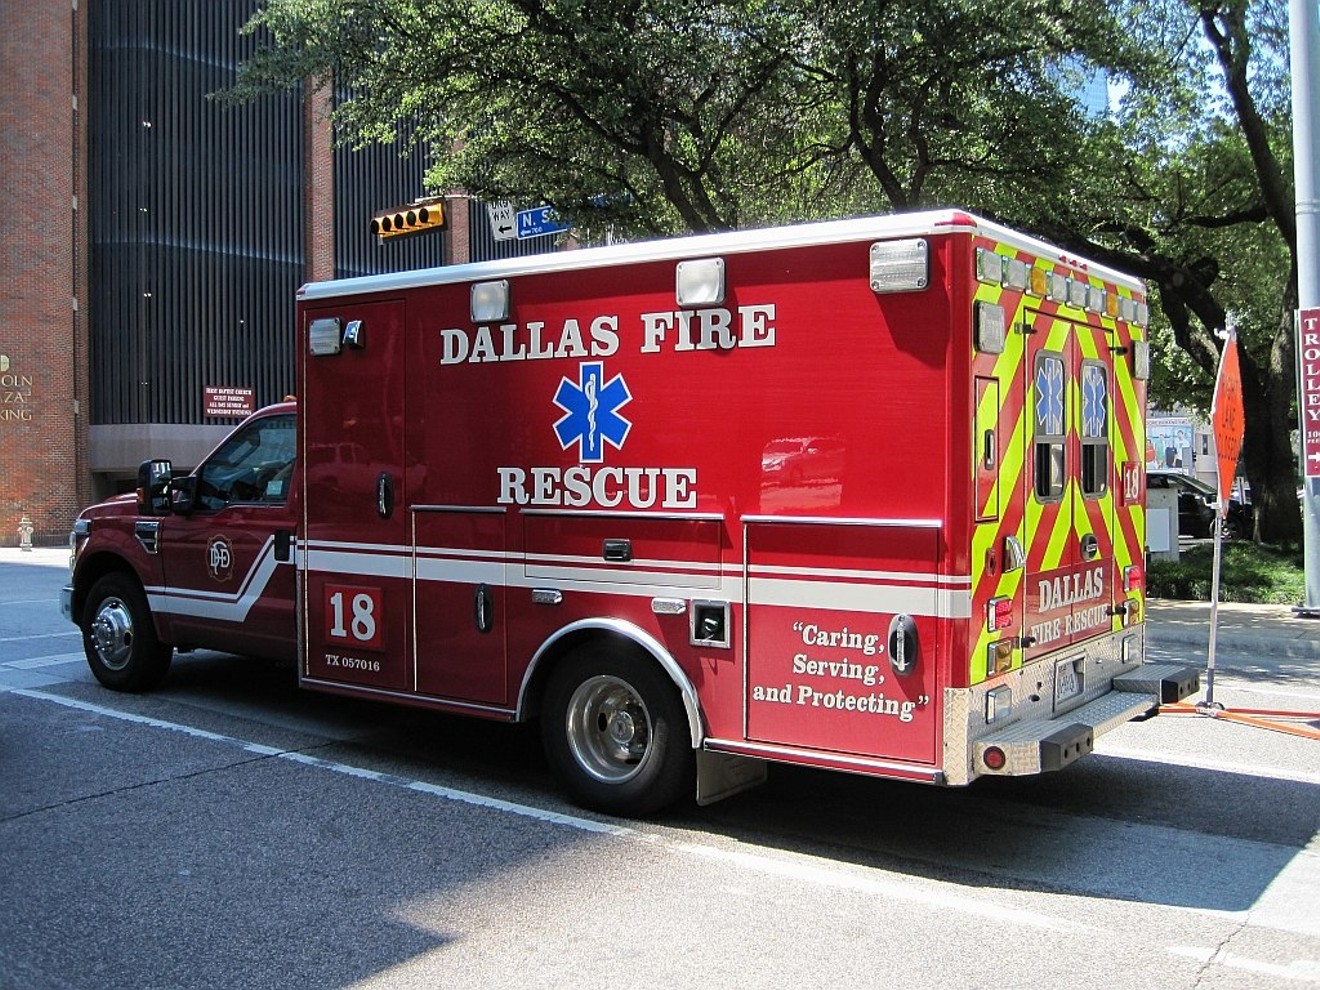 "Caring, serving, and protecting?" A lawsuit alleges Dallas cares for, serves and protects its bad apples in Dallas Fire-Rescue.